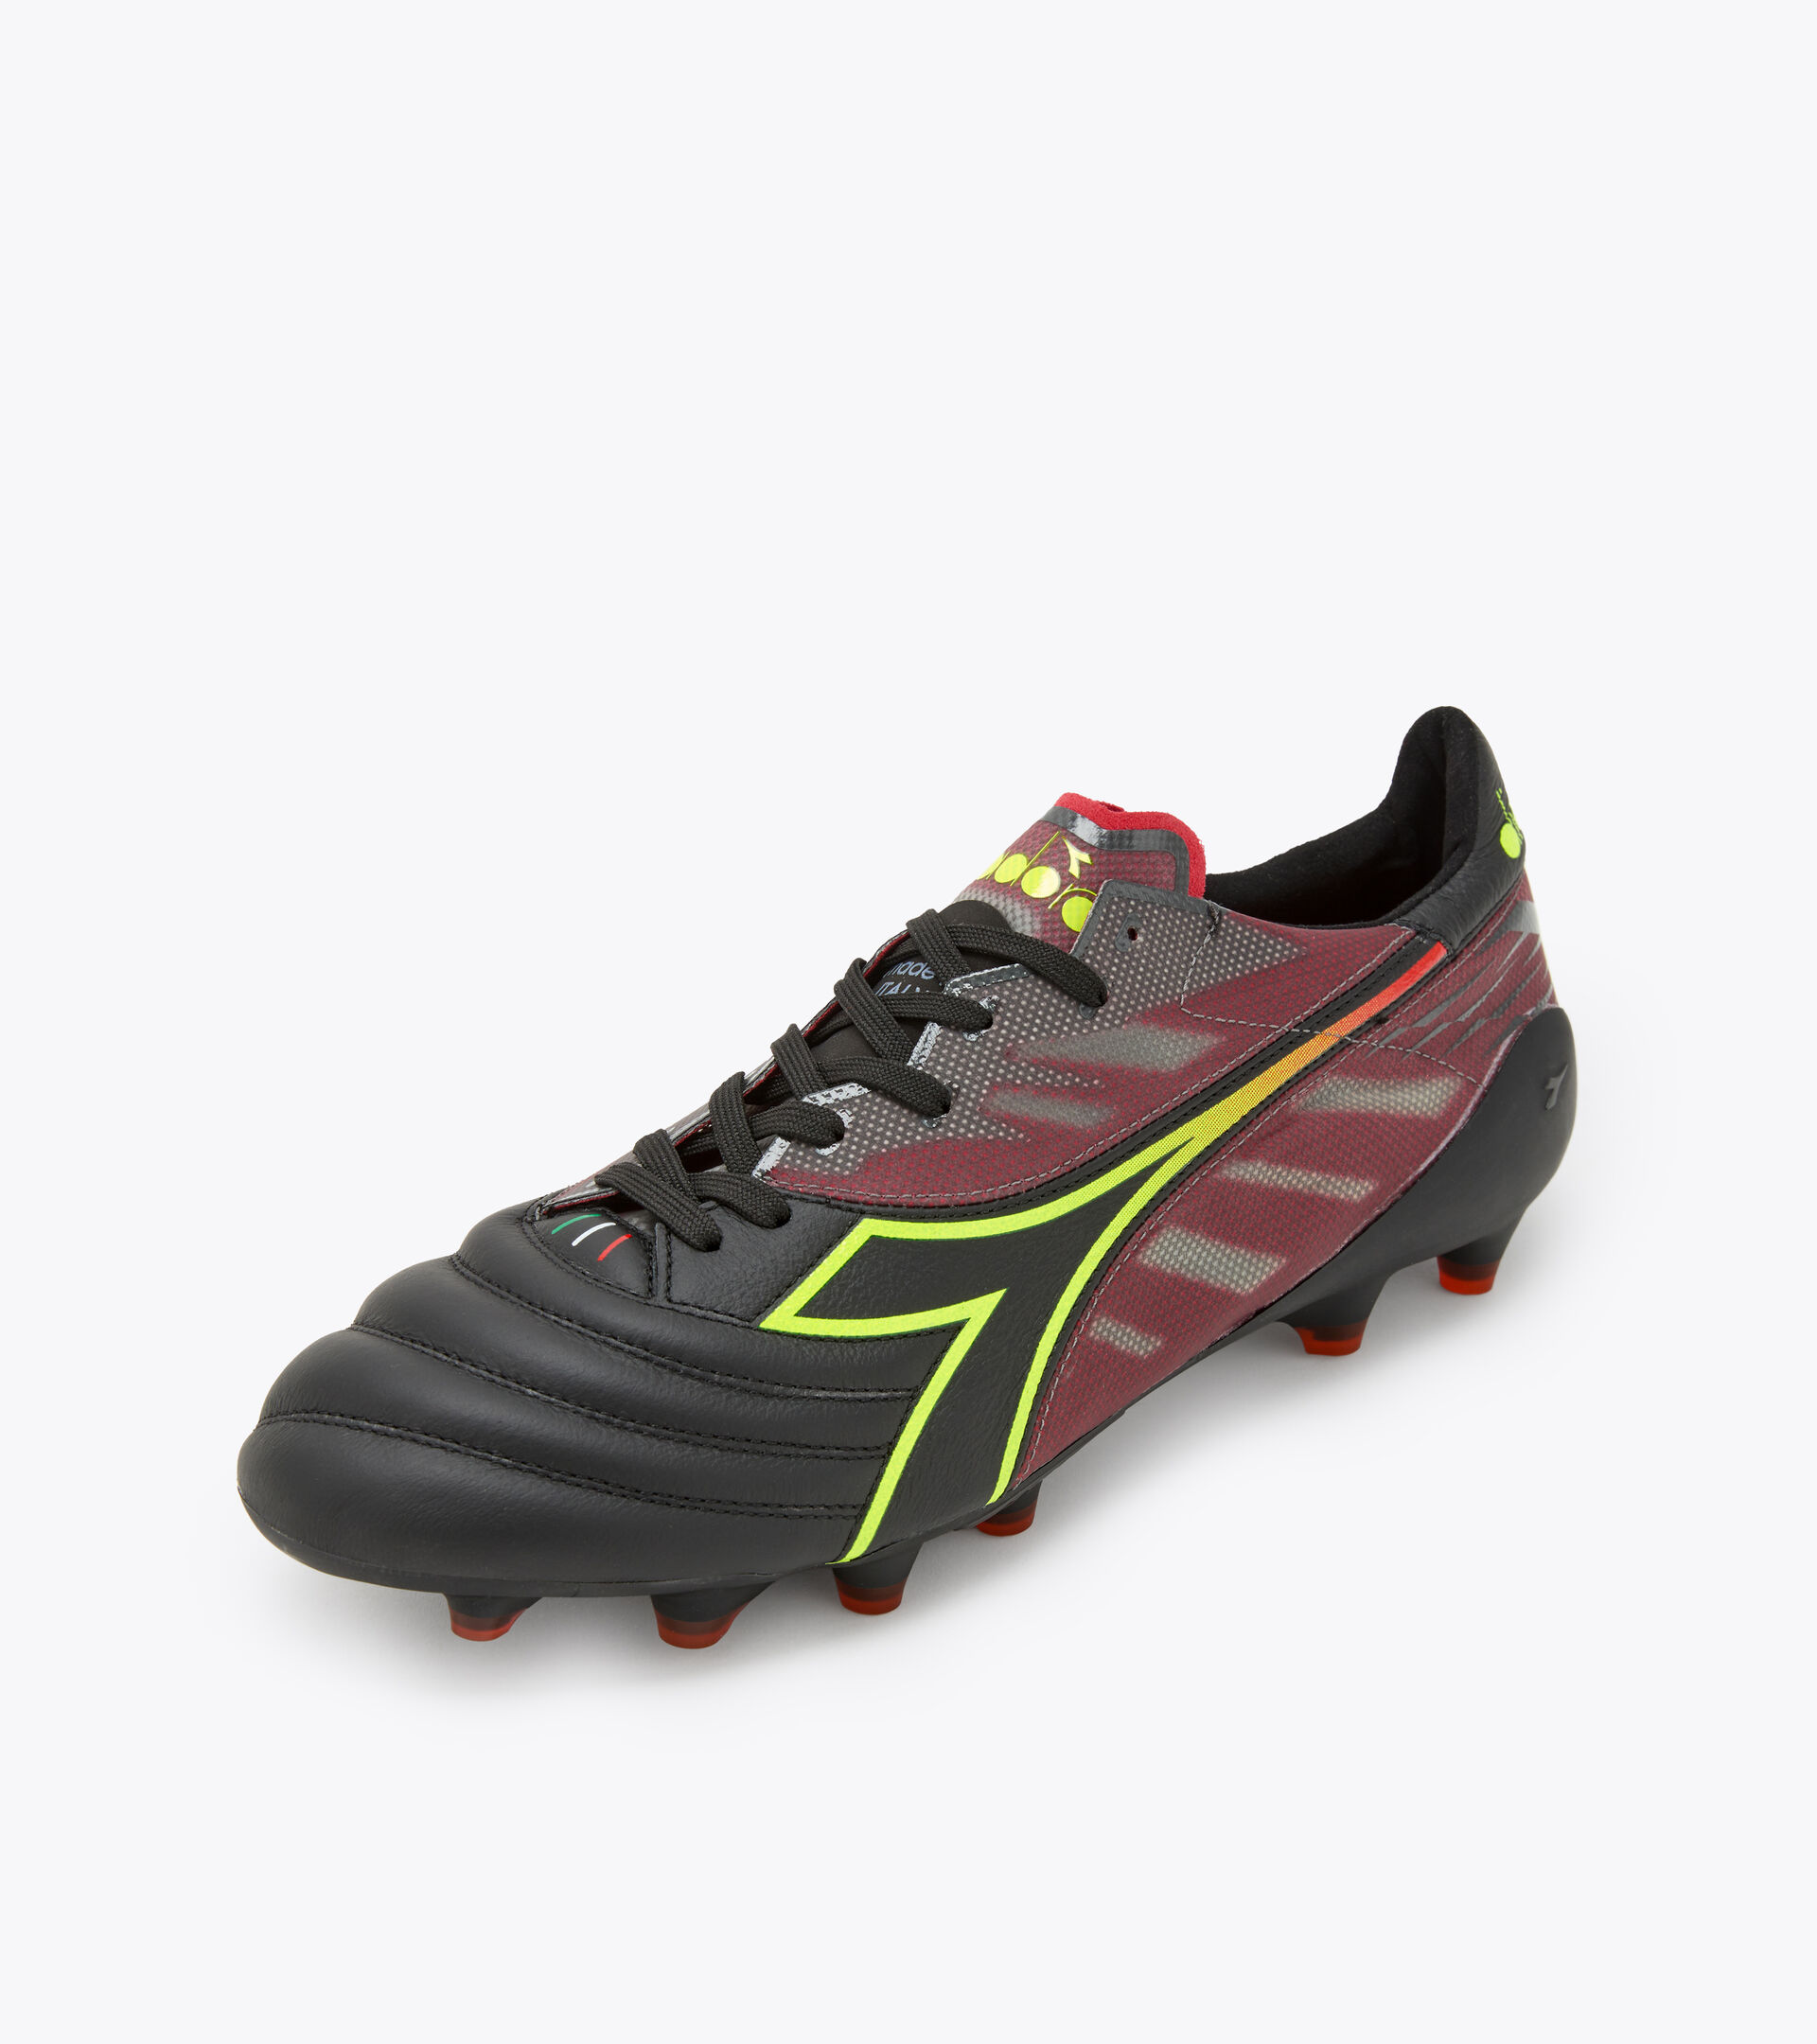 Firm ground football boots - Made in Italy BRASIL ELITE VELOCE ITA LPX BLK/FLUO YELLOW DD/MILANO RED - Diadora